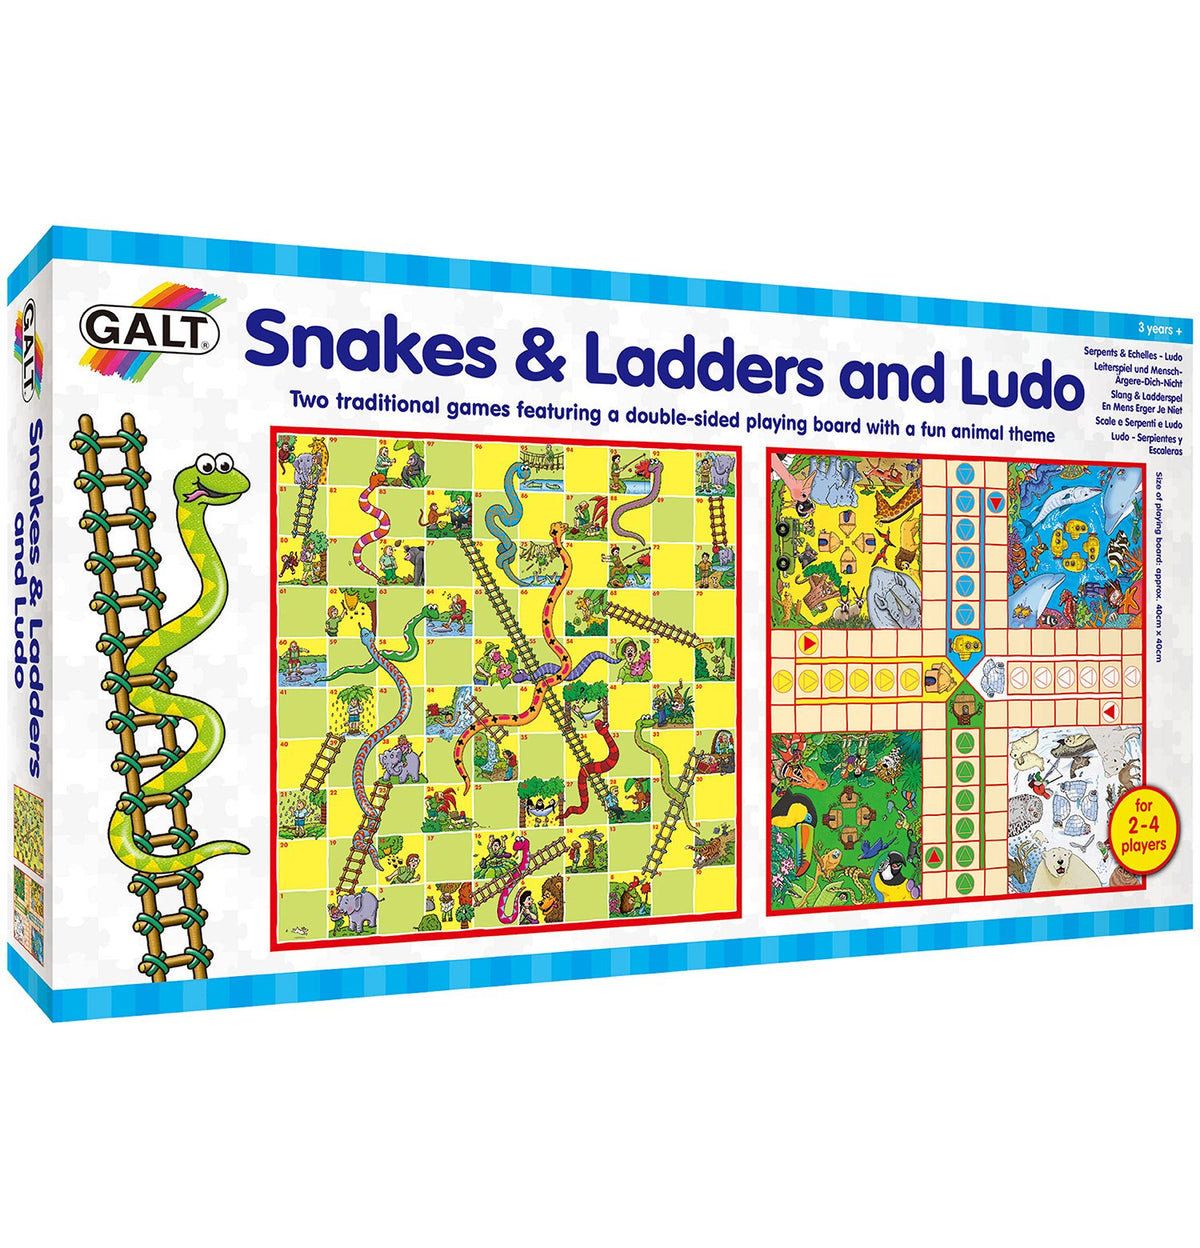 Snakes &amp; Ladders and Ludo - Galt